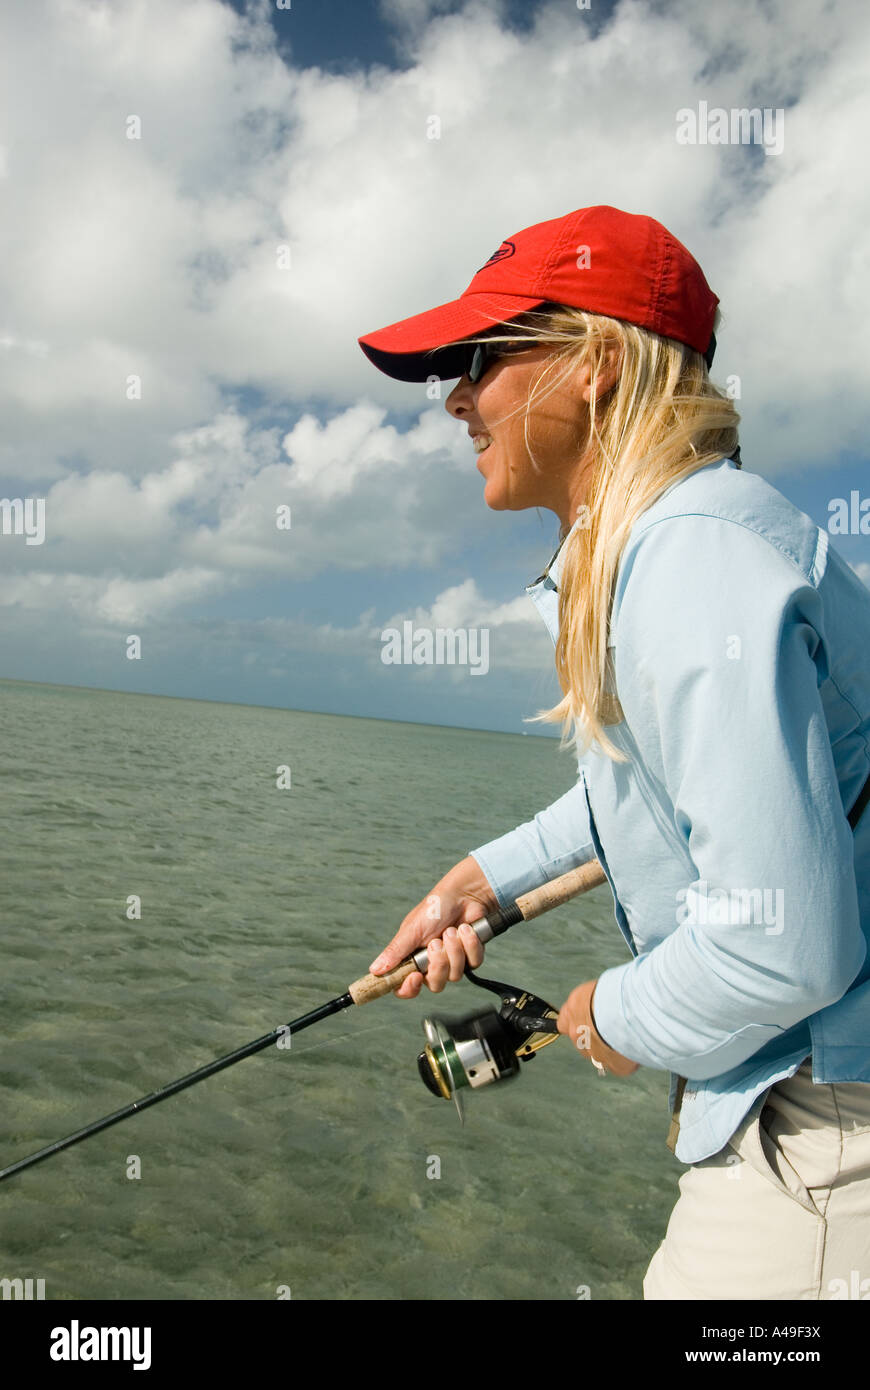 USA Florida Keys Woman fisherman in red hat fishing from flats